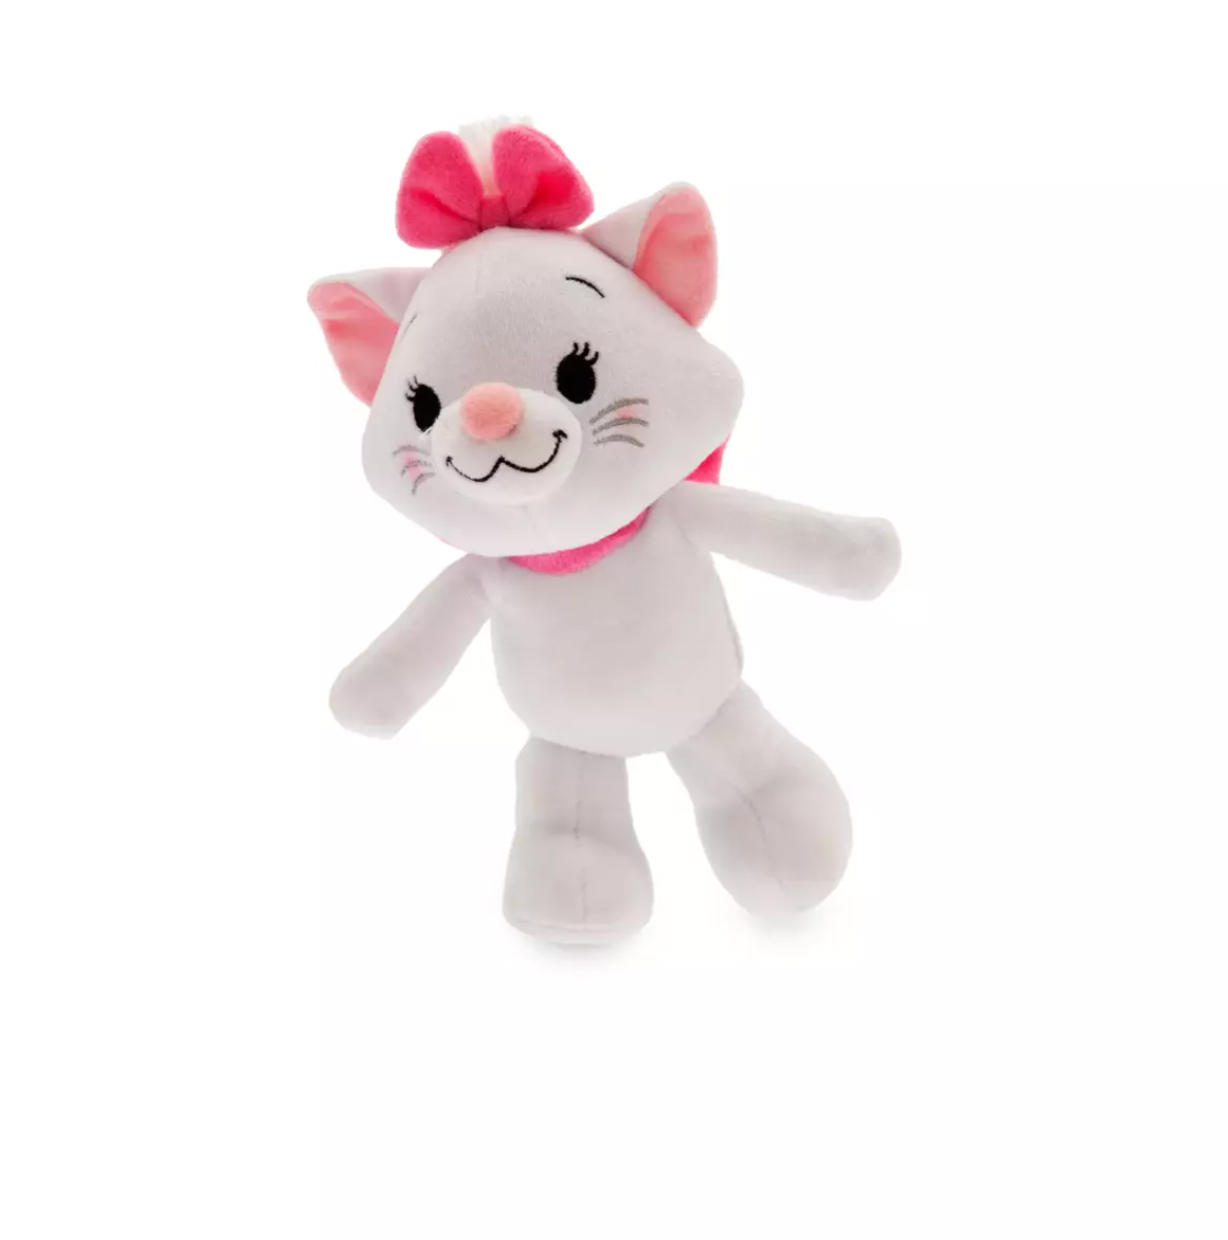 Disney NuiMOs The Aristocats Marie Plush New with Tag